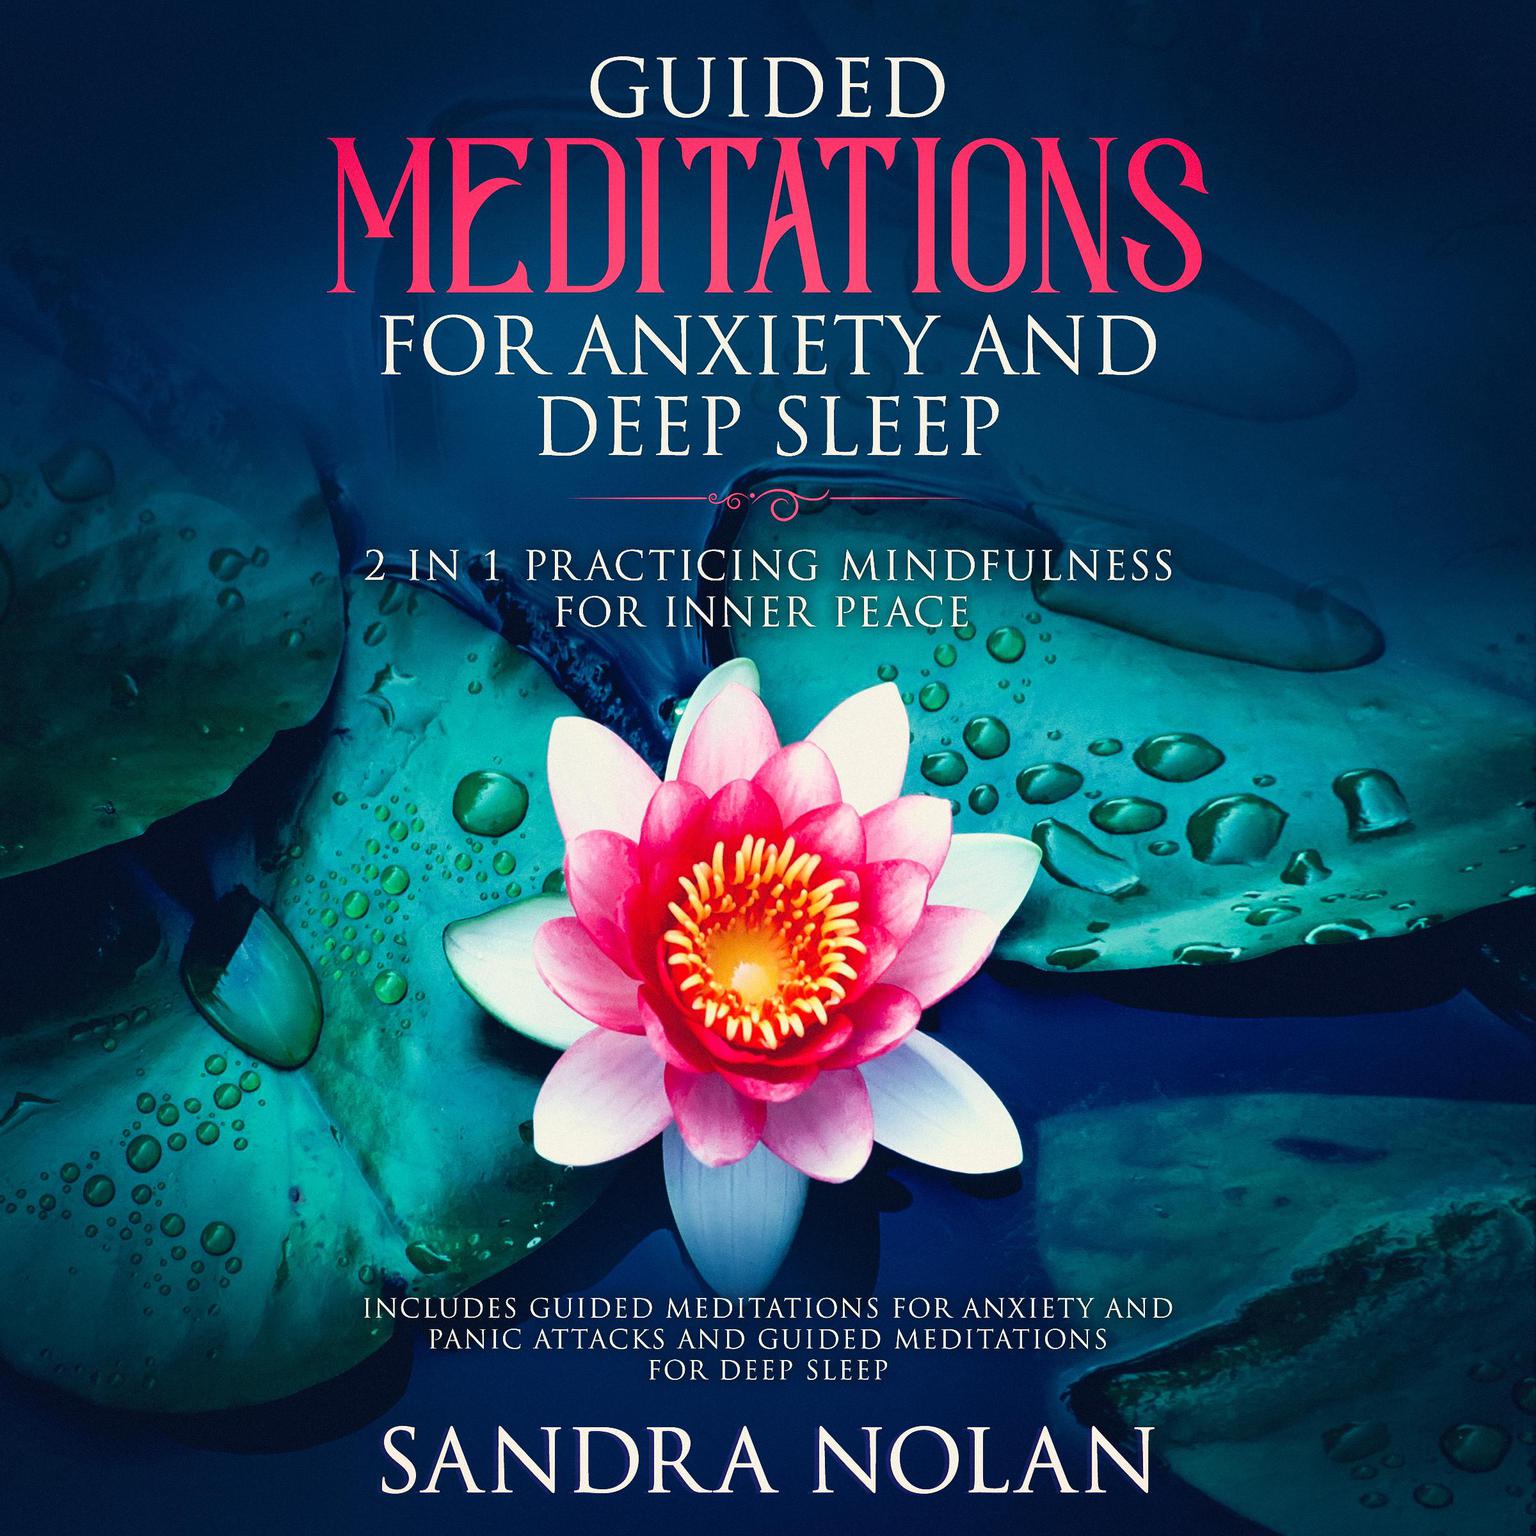 Guided Meditations for Anxiety and Panic Attacks: 2 in 1: Guided Meditations for Anxiety and Panic Attacks, and Guided Meditations for Deep Sleep Audiobook, by Sandra Nolan